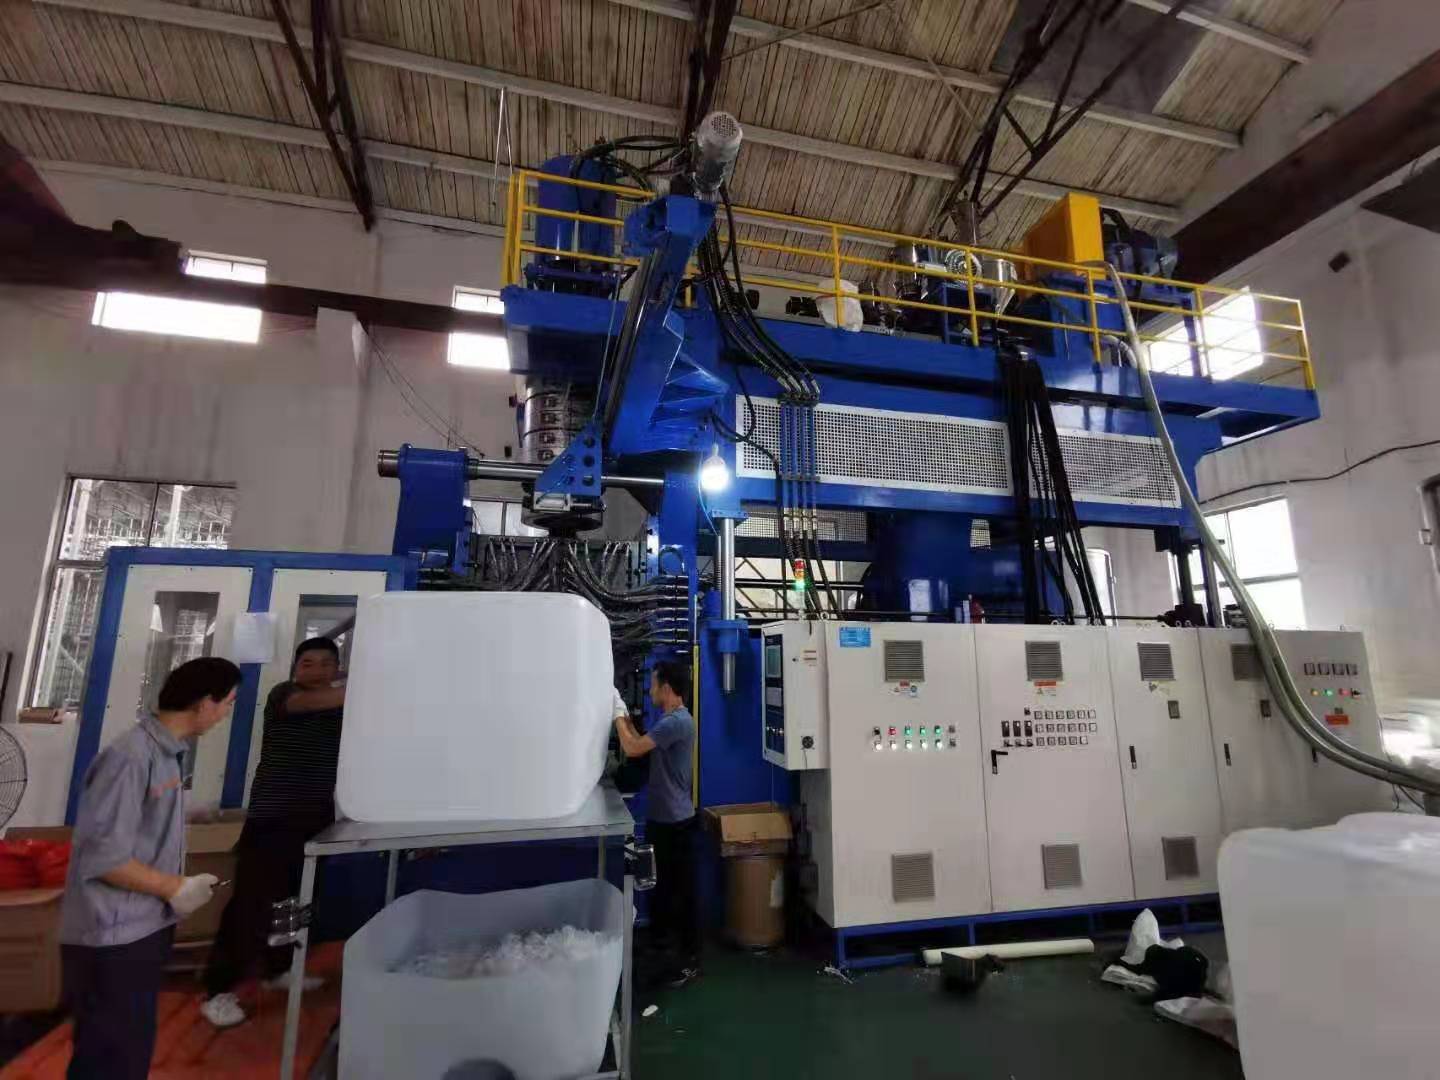 Plastic 1000L IBC tank container hdpe 1000 liter ibc tote making blow molding machine production line